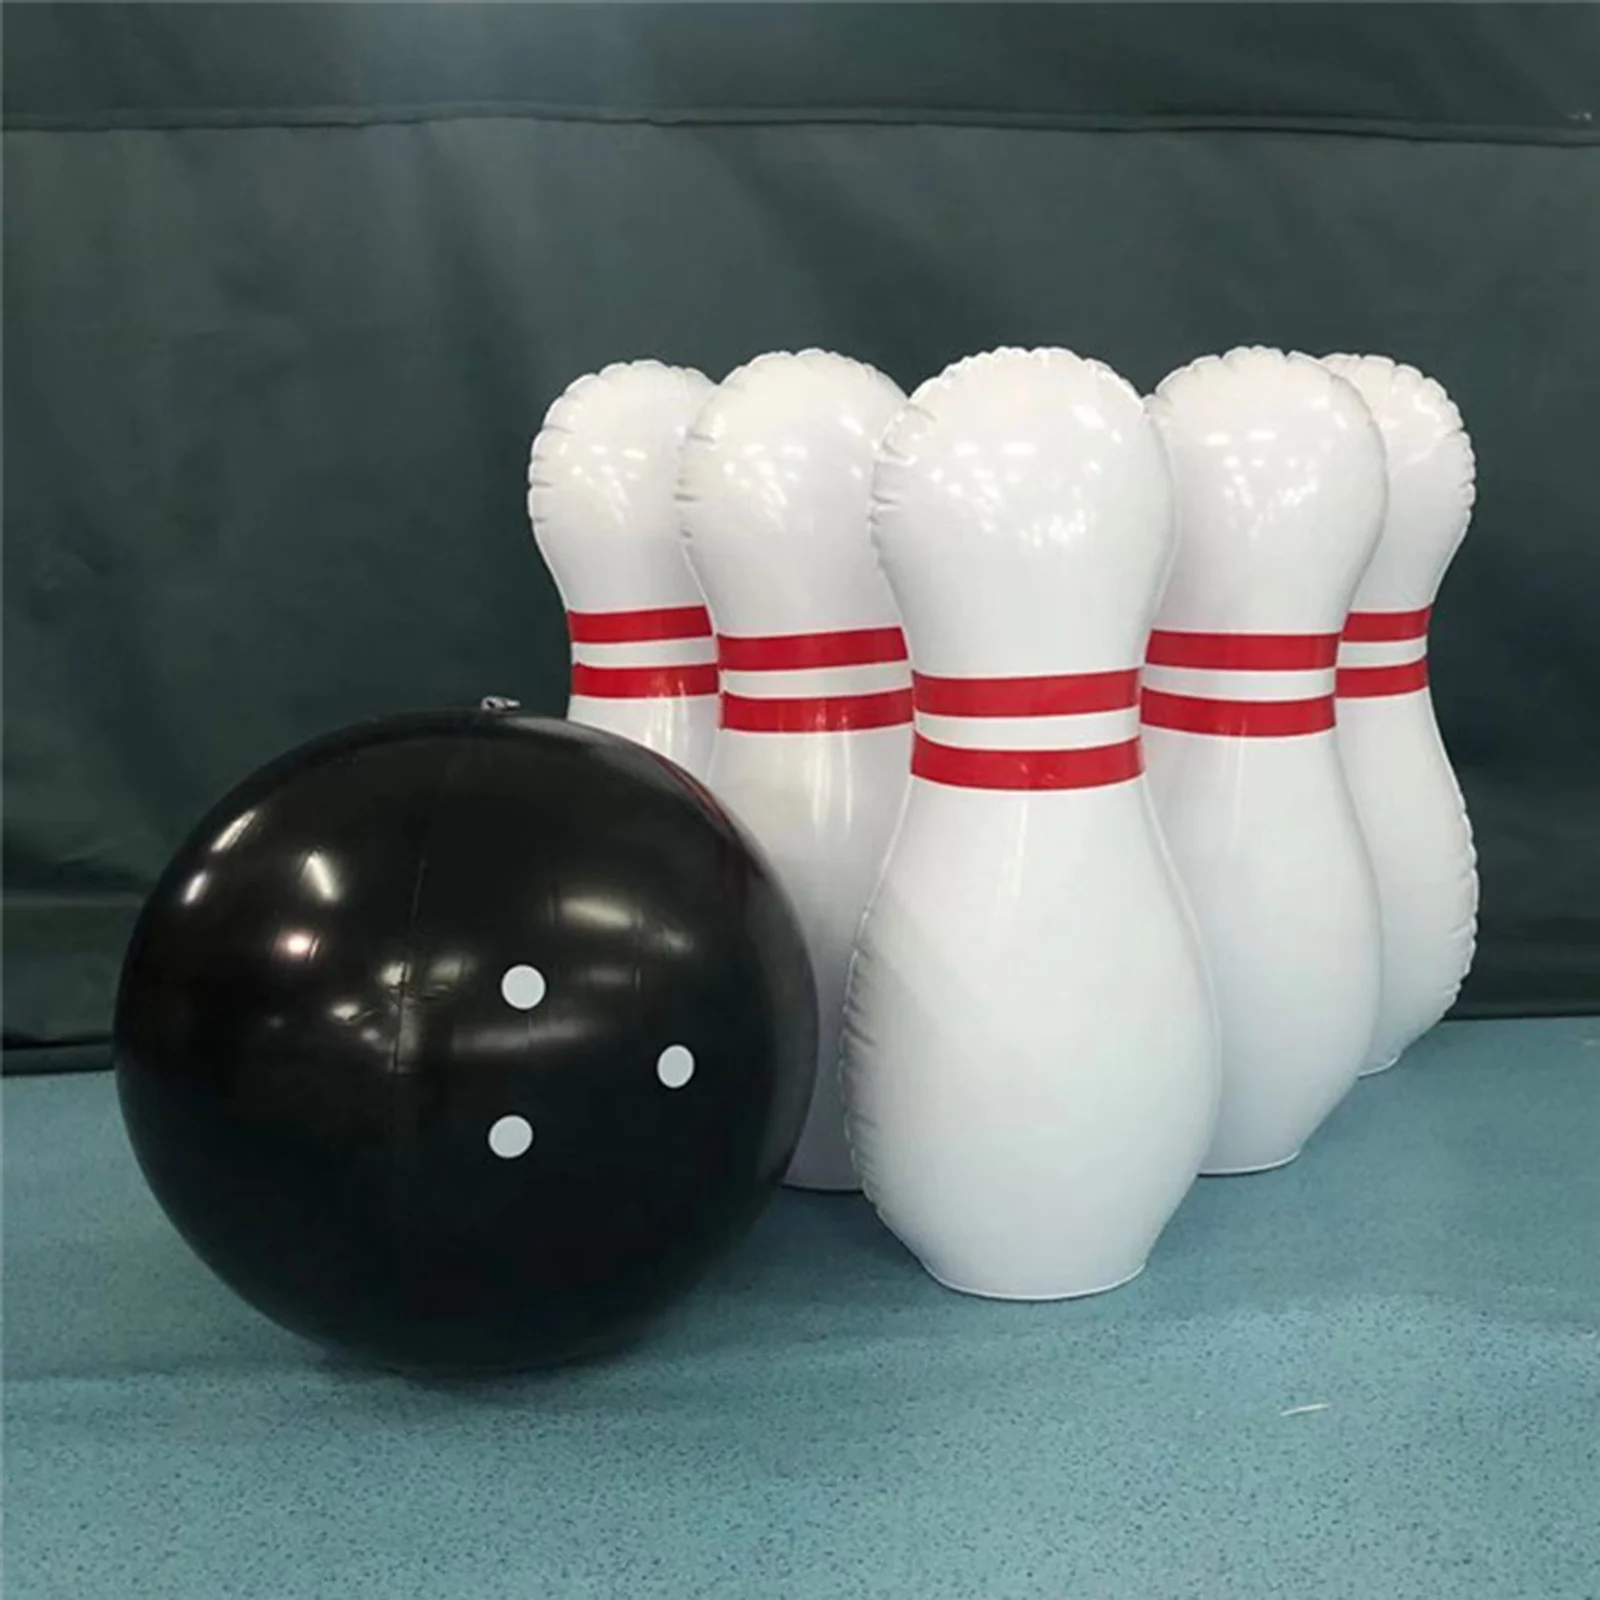 Pvp Inflatable Bowling Game Toy Set Yard Games Sports Enlightenment Gift Parent Child Interactive Toys Indoor Family Toys